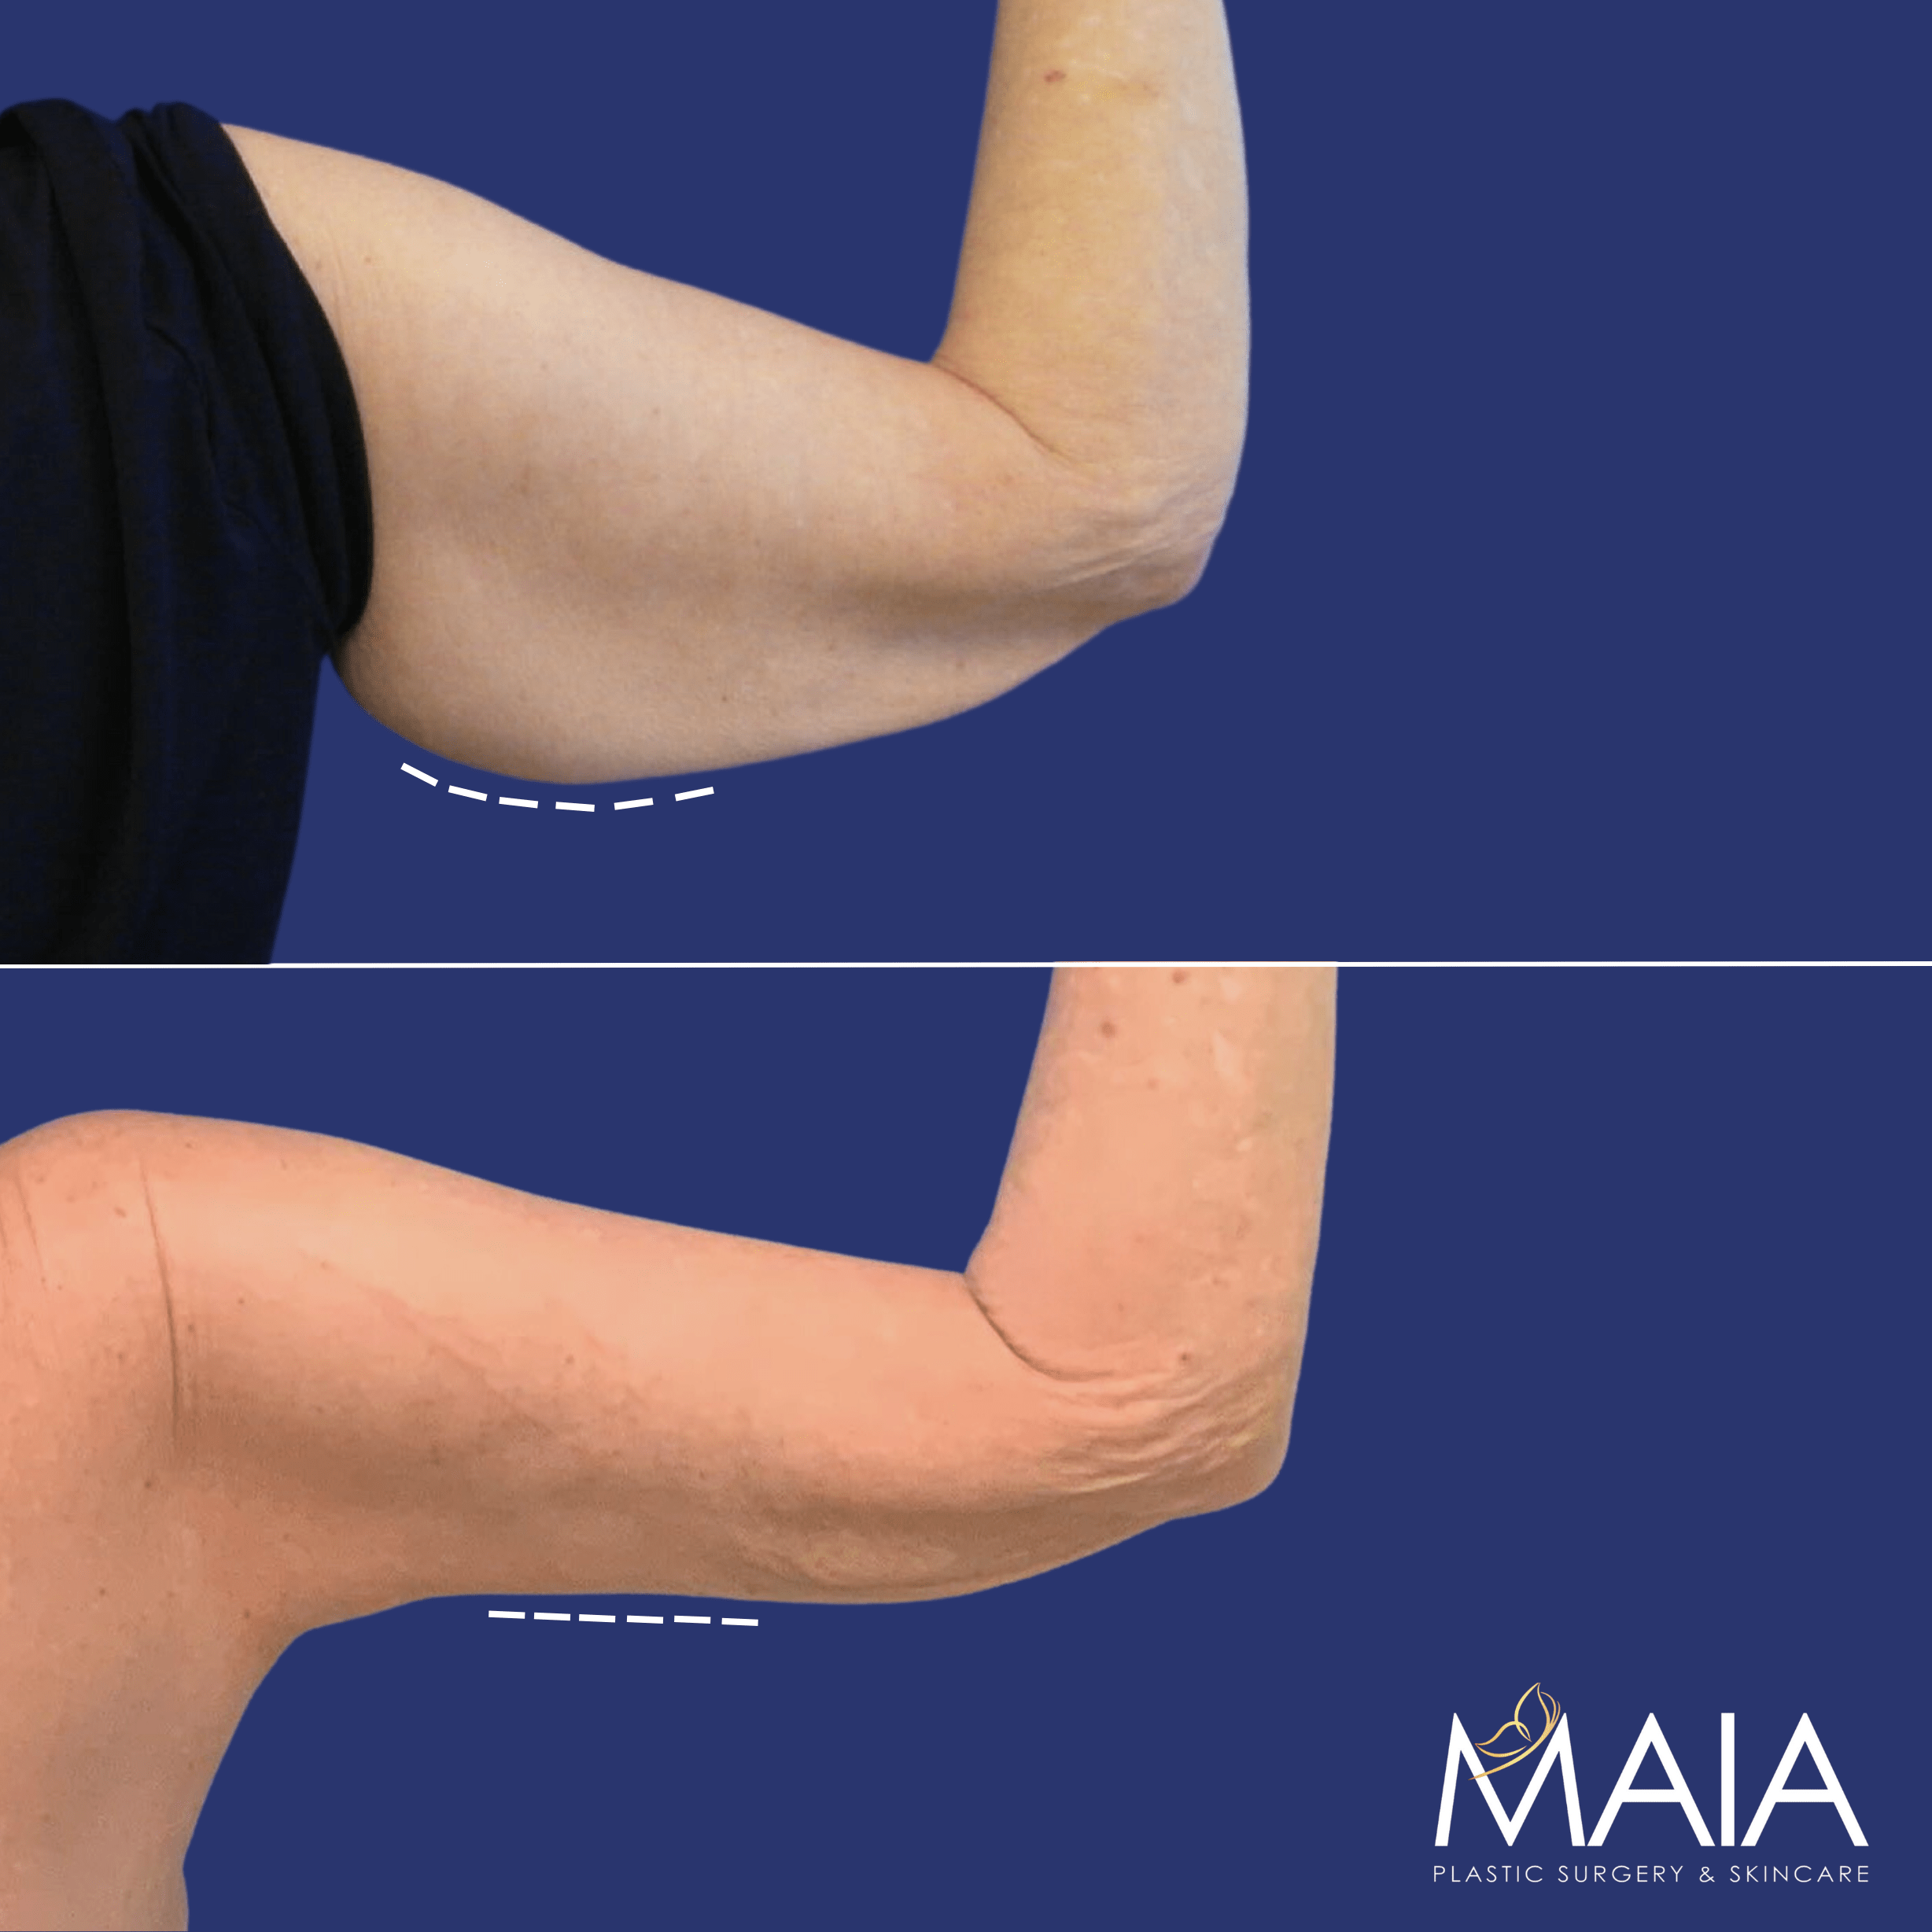 60 year-old female before and after an arm lift